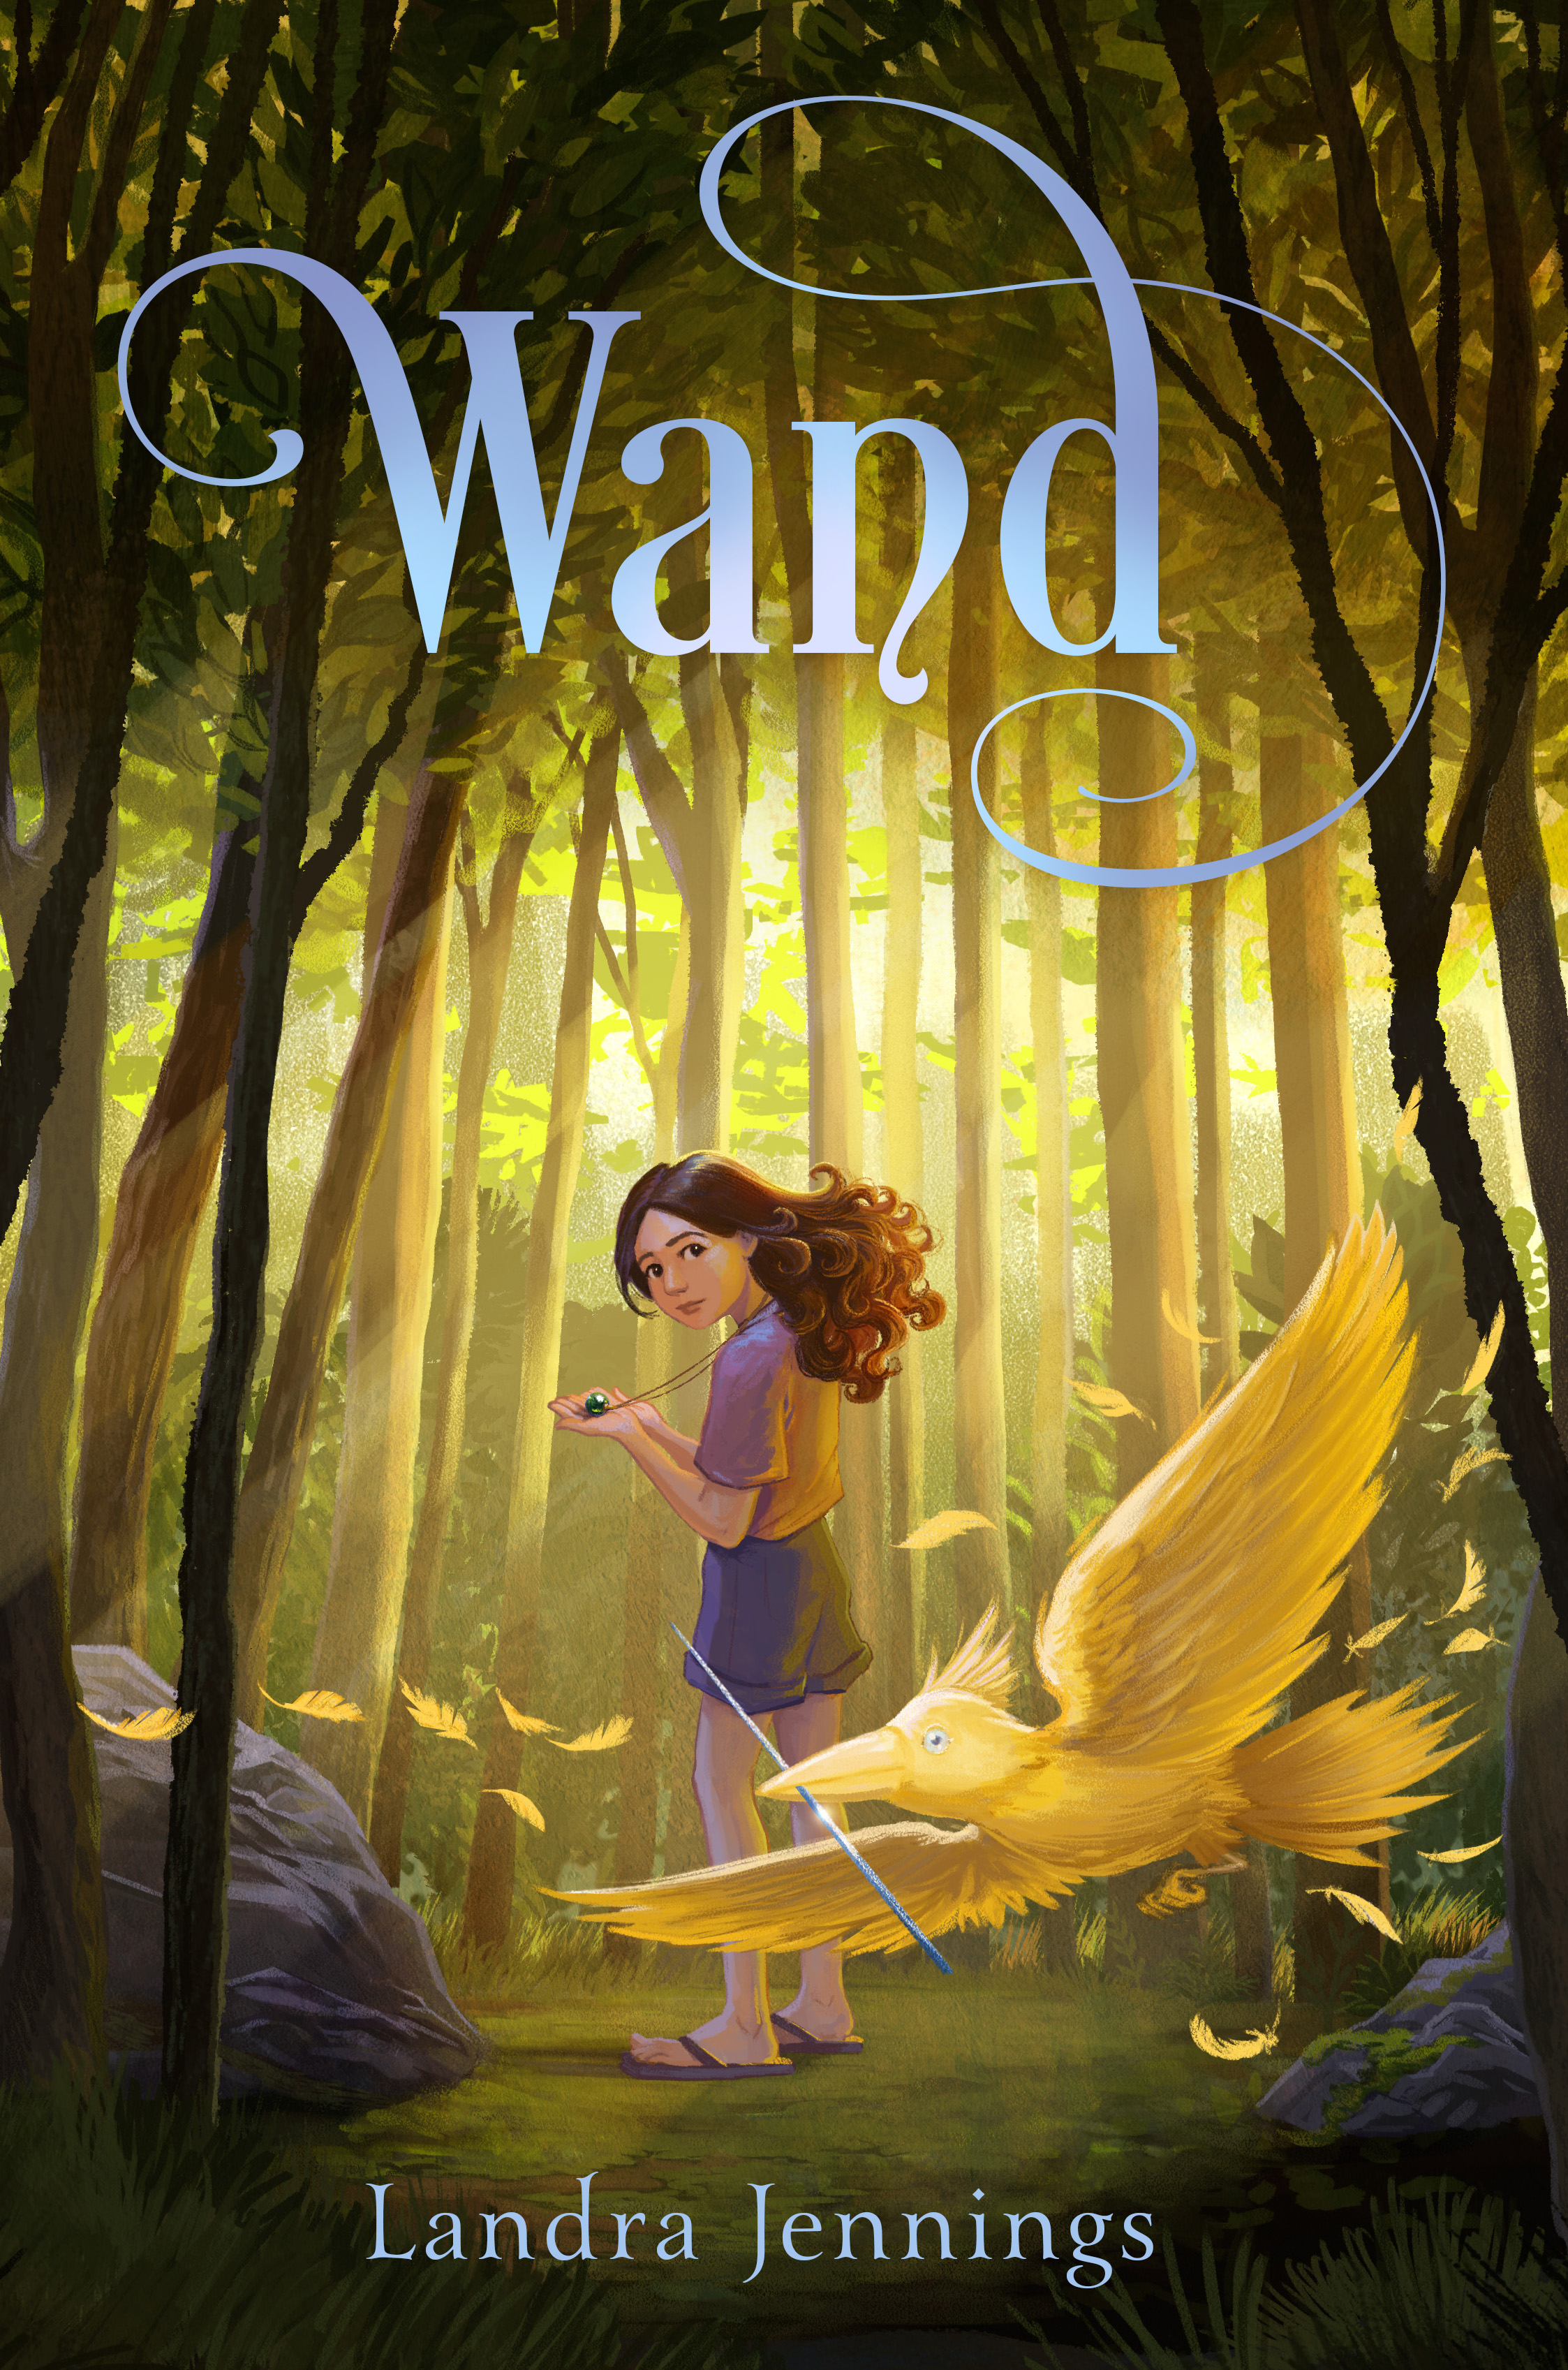 Girl looks back from the edge of the woods to where a golden bird flies carrying a silver wand